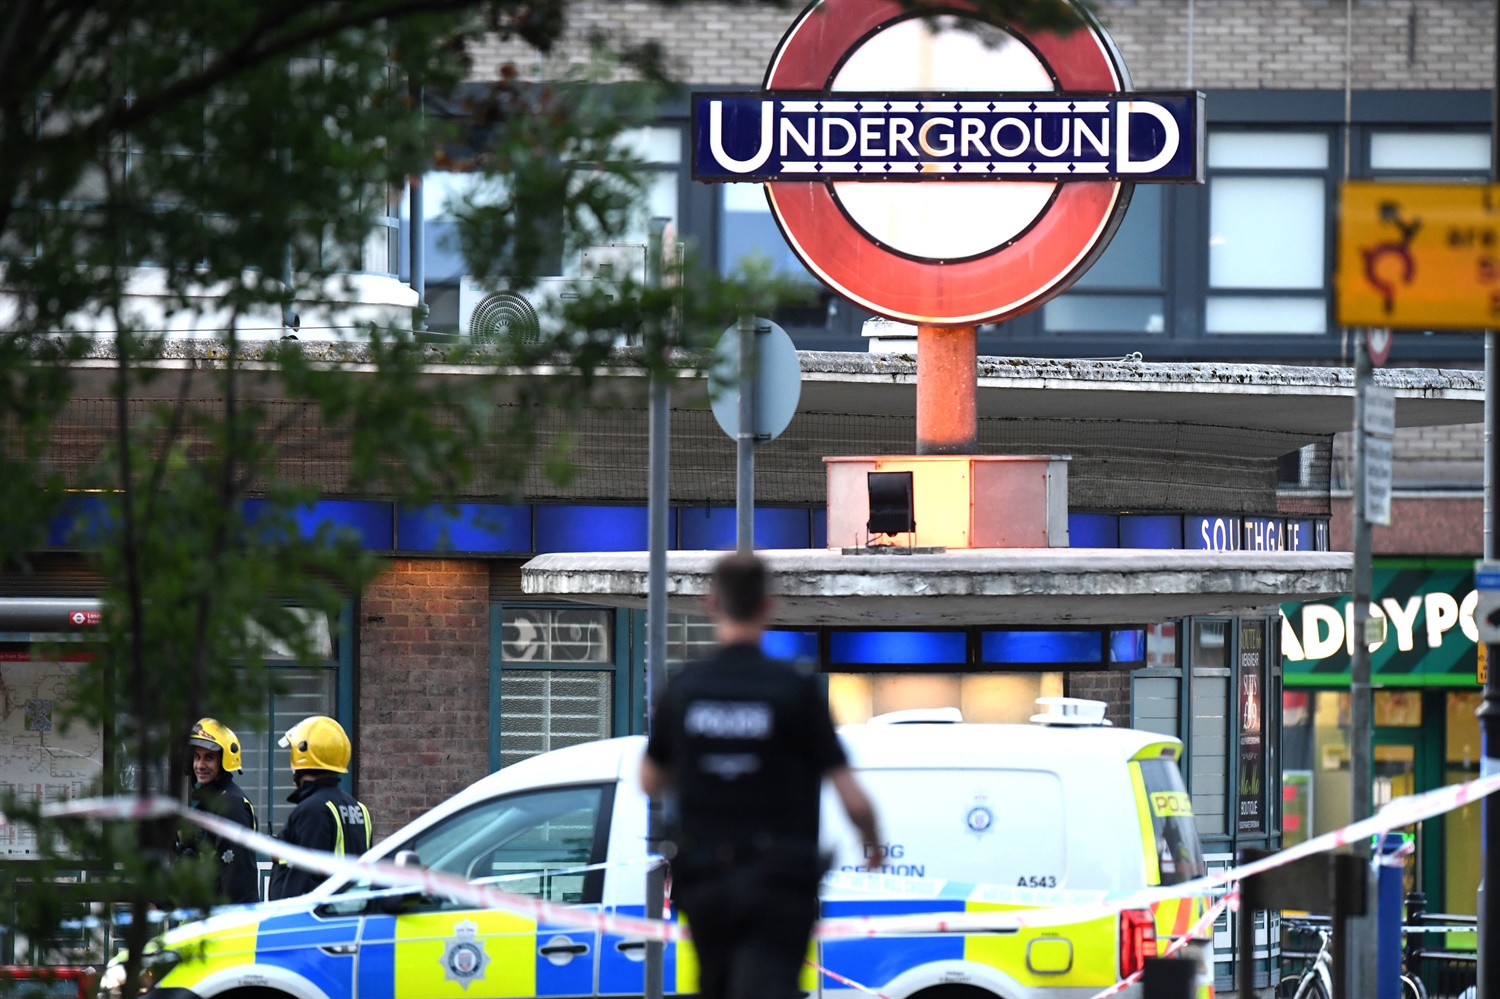 Five injured in Tube explosion